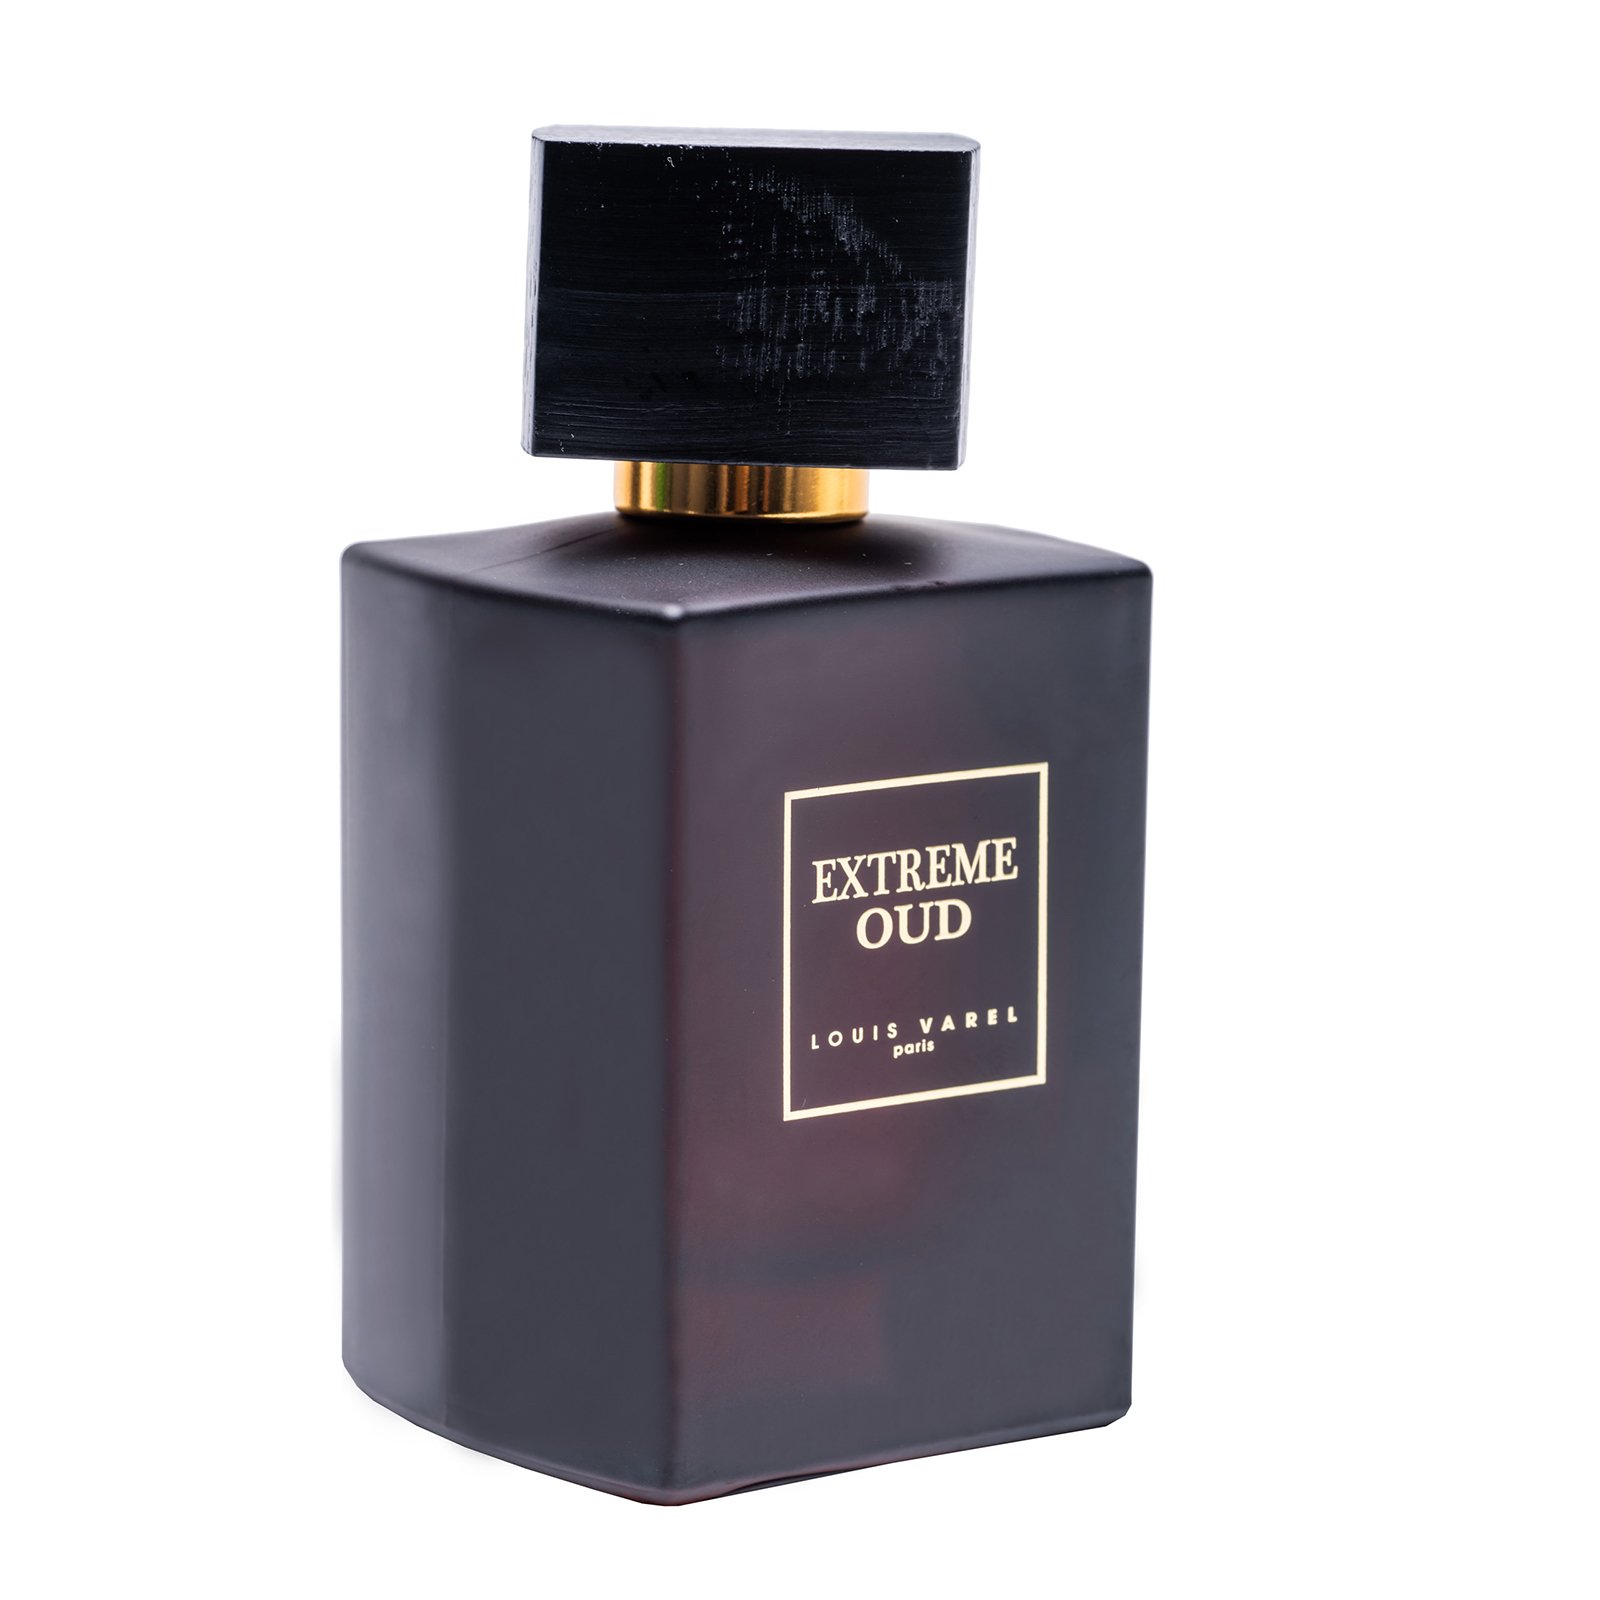 Extreme Oud by Louis Varel 